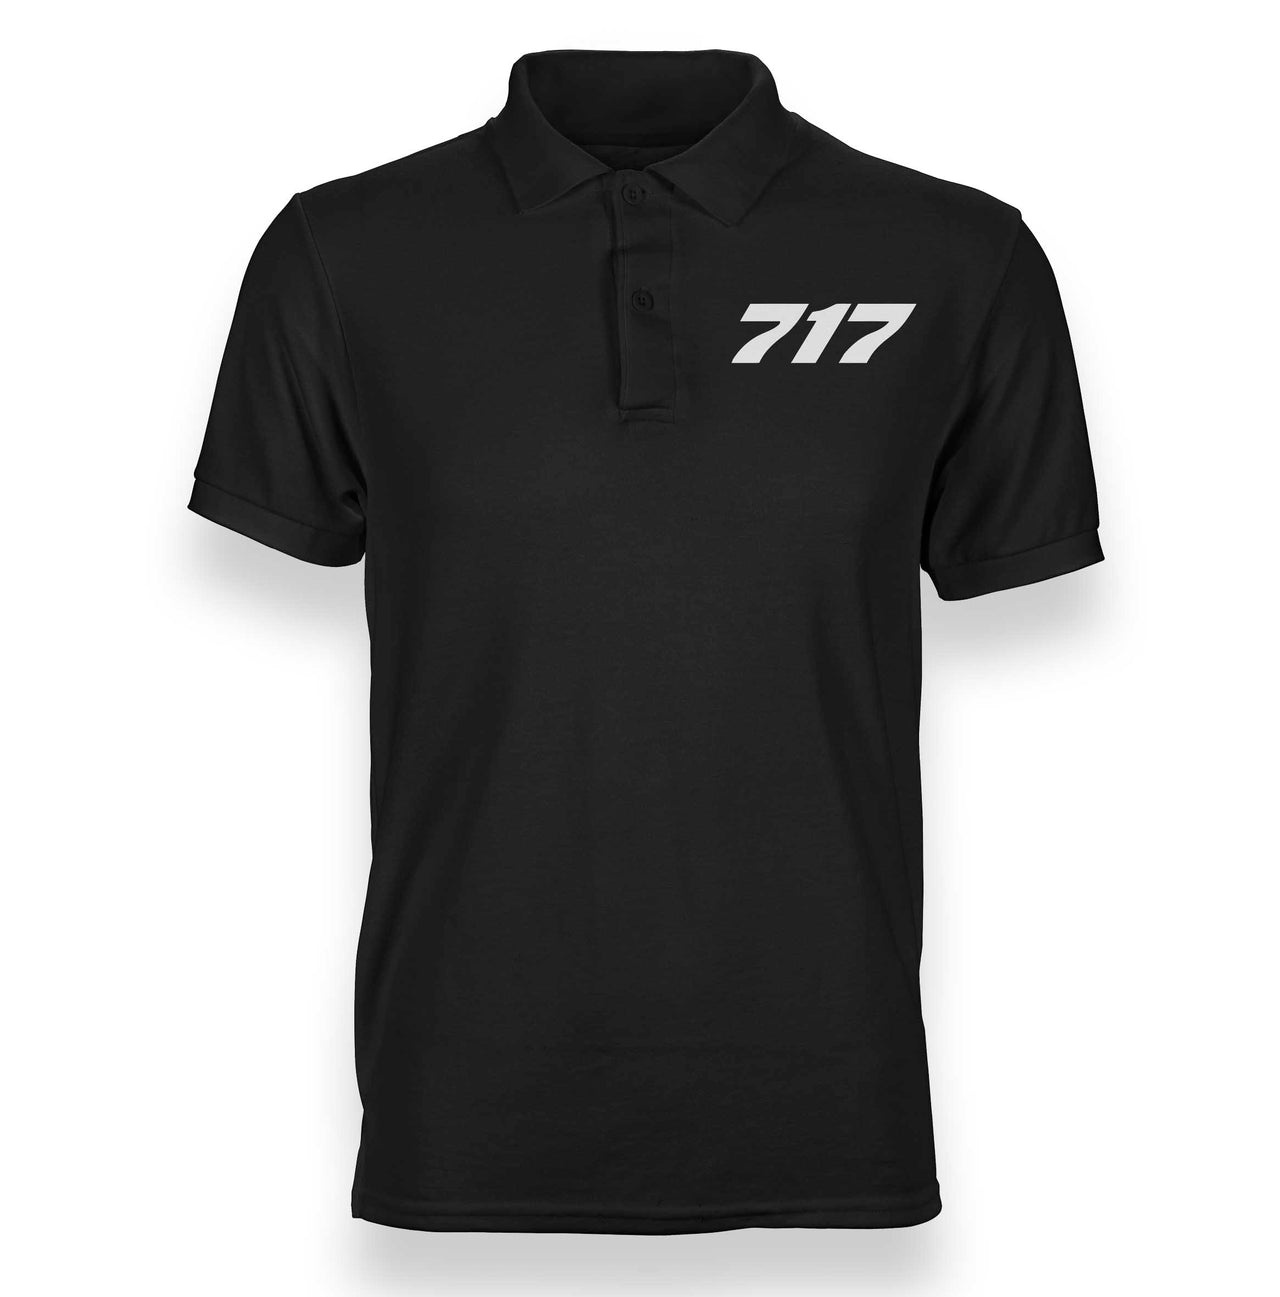 Boeing 717 Flat Text Designed Polo T-Shirts